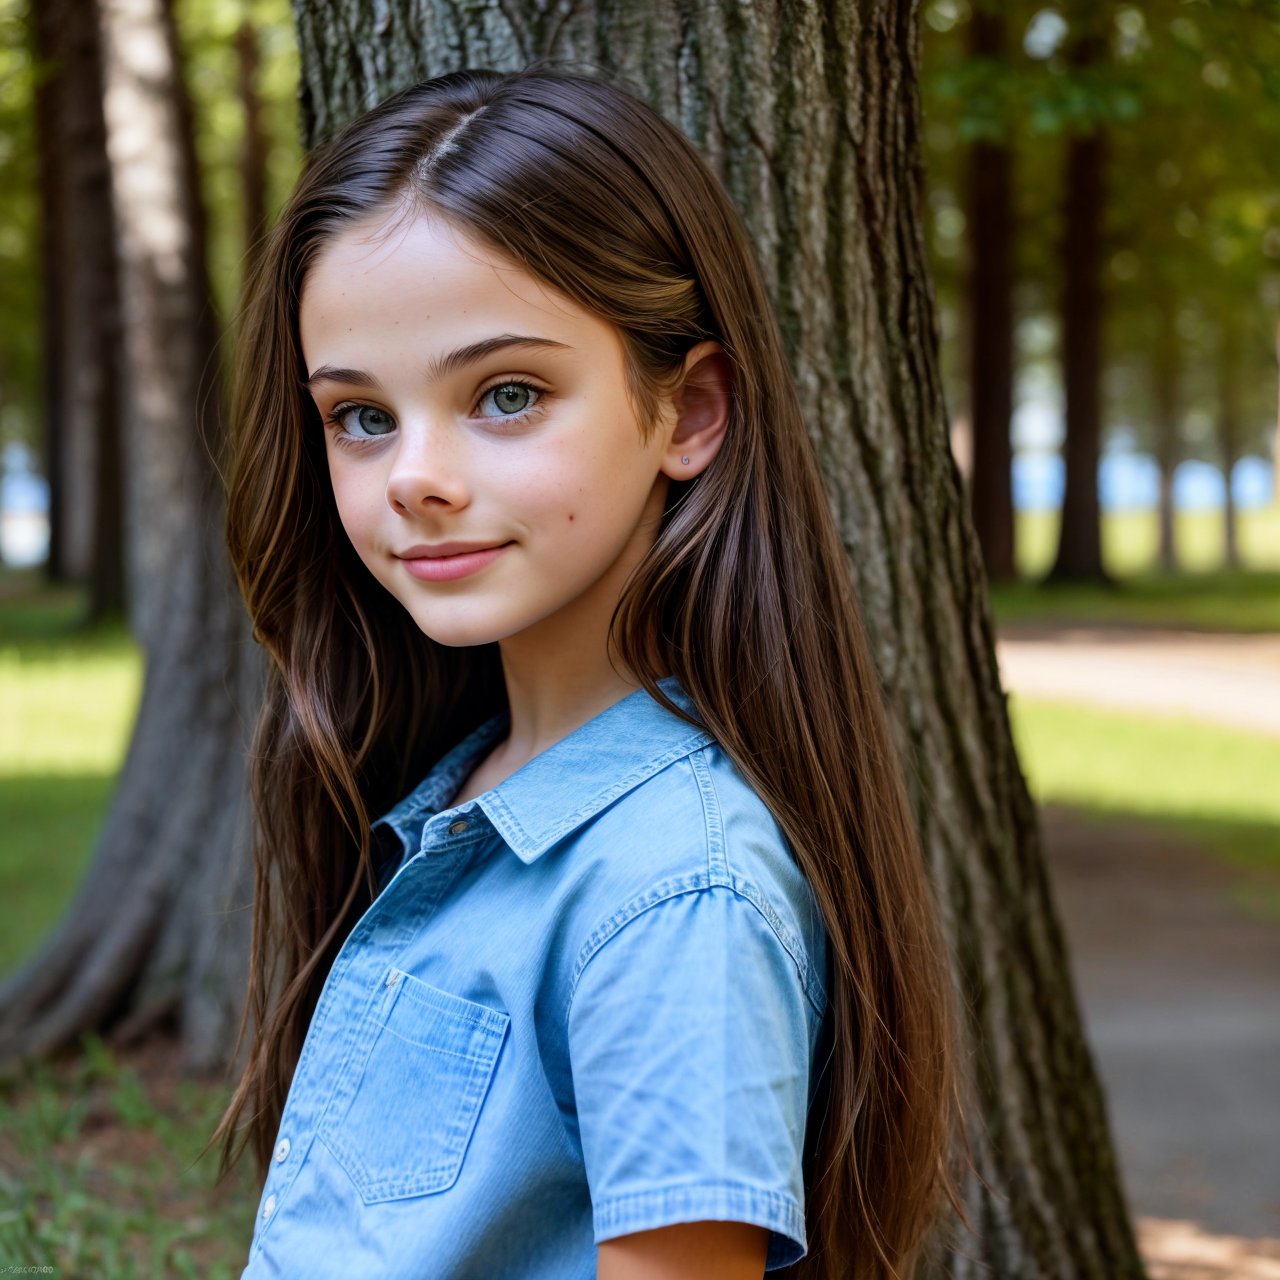 wallpaper, view from below, profile of smiling (AIDA_LoRA_MeW2016:1.01) <lora:AIDA_LoRA_MeW2016:0.97> as little girl wearing a simple shirt and denim skirt posing in the park with trees on the background, outdoors, pretty face, naughty, funny, happy, playful, insane level of details, studio photo, studio photo, kkw-ph1, hdr, f1.6, getty images, (colorful:1.1)